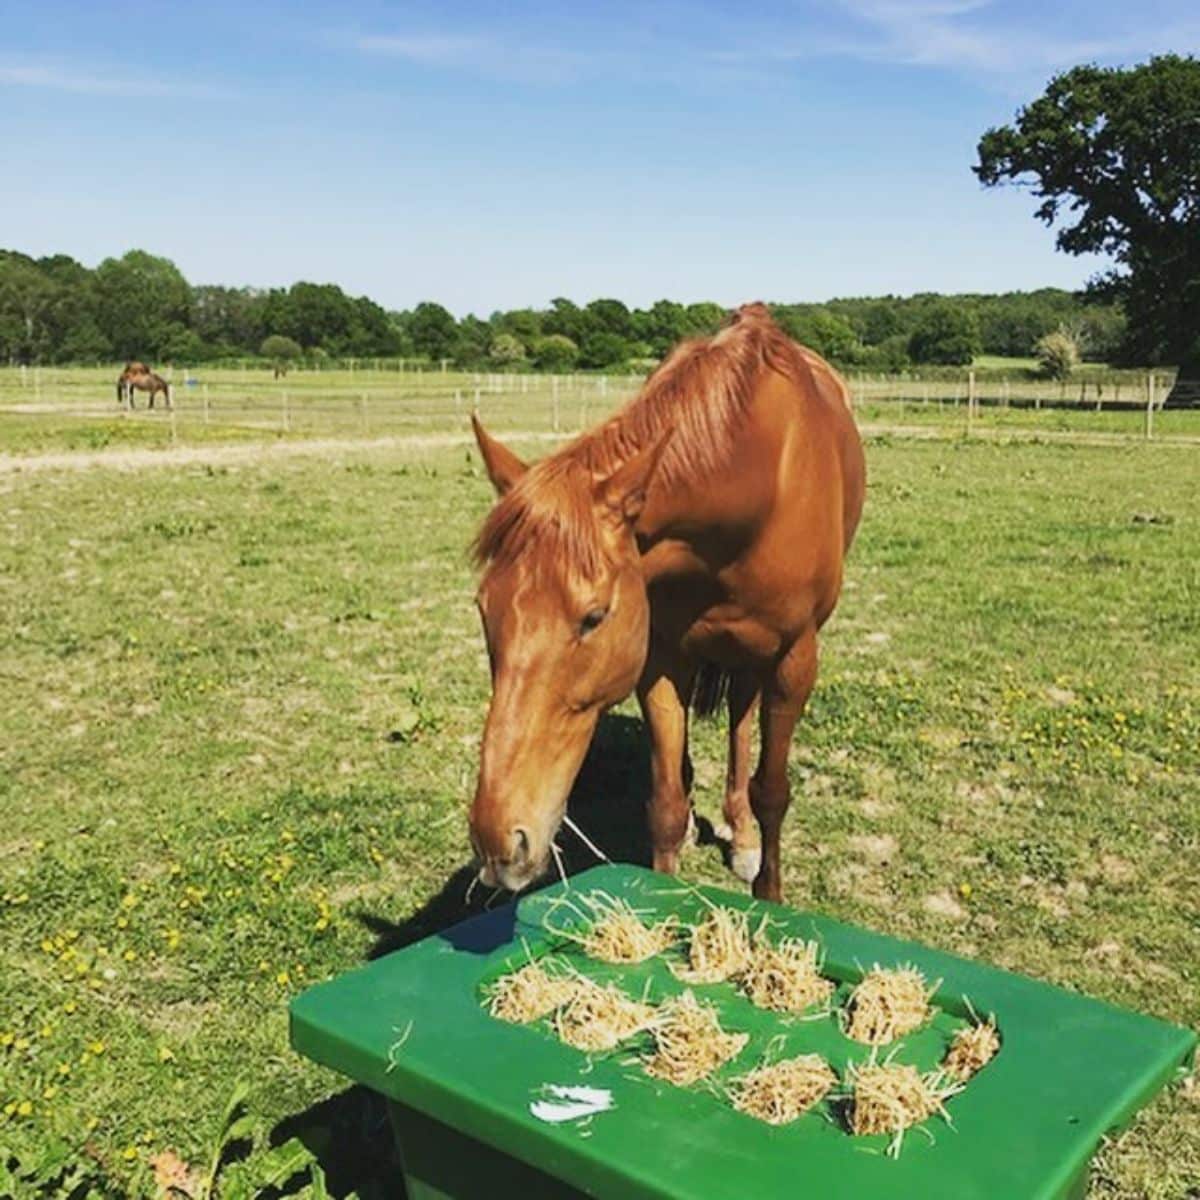 A brown horse grazes from a plastic horse feeder.